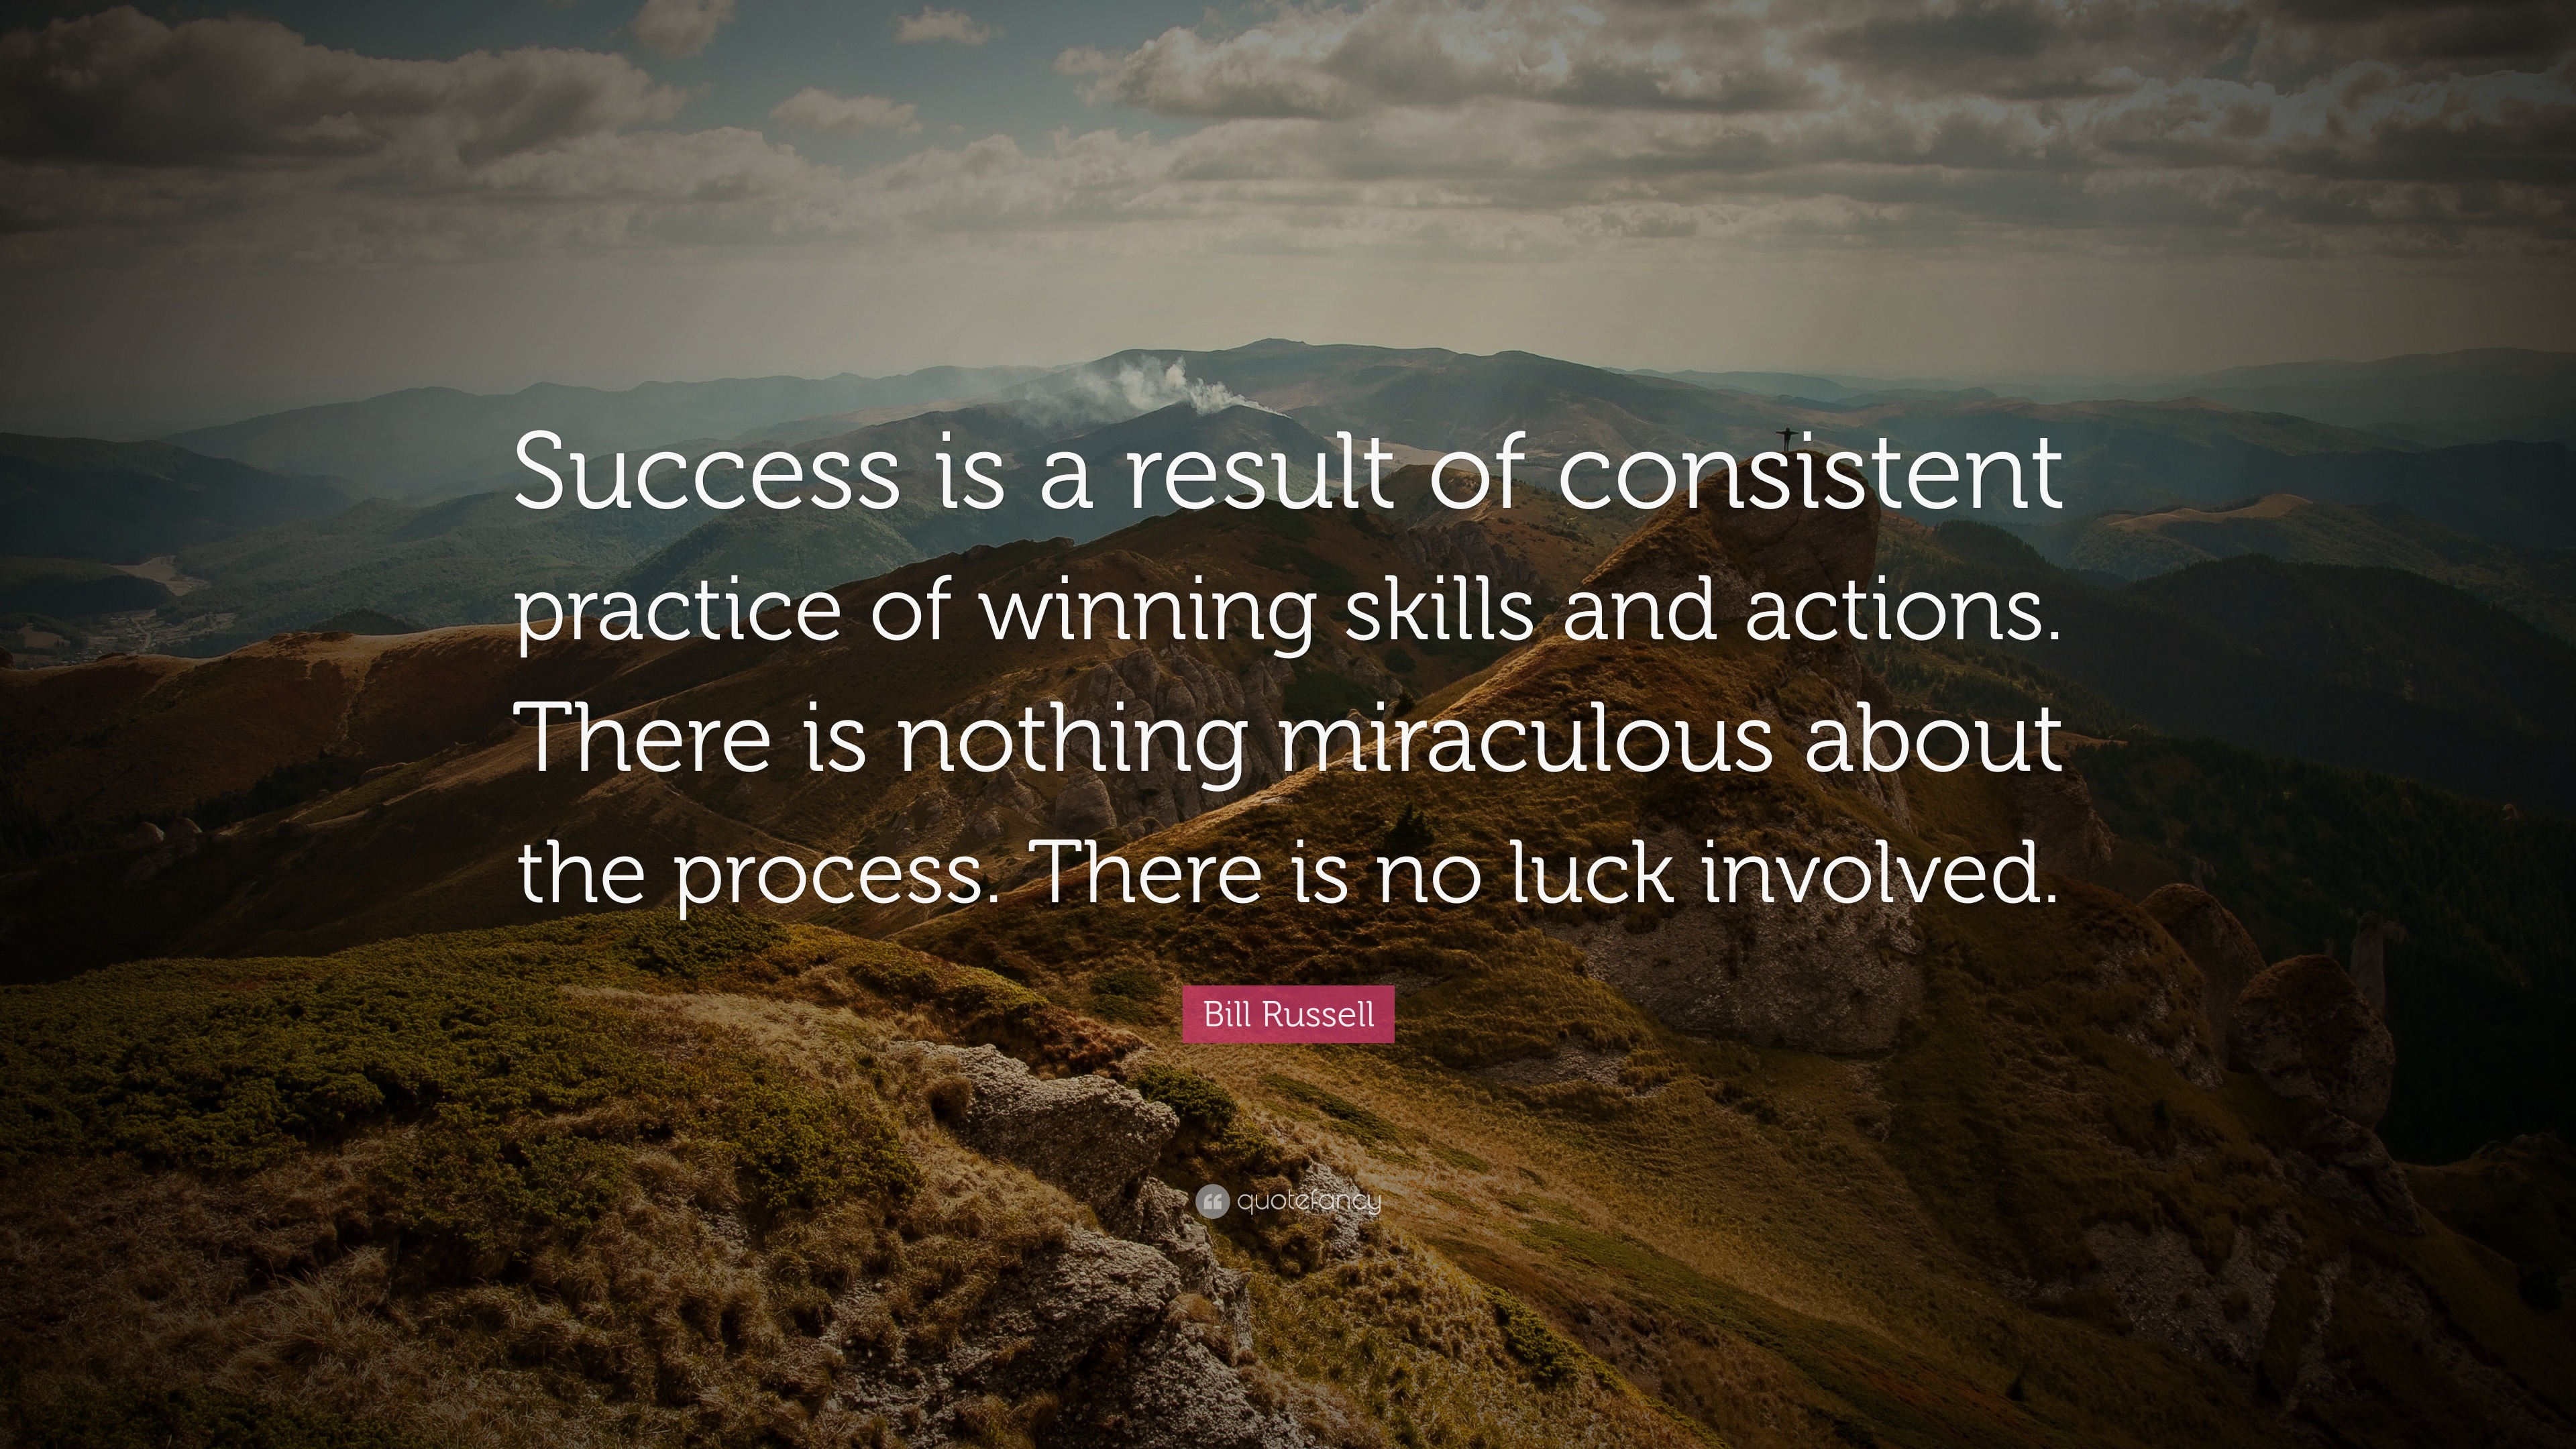 Bill Russell Quote: “Success is a result of consistent practice of ...